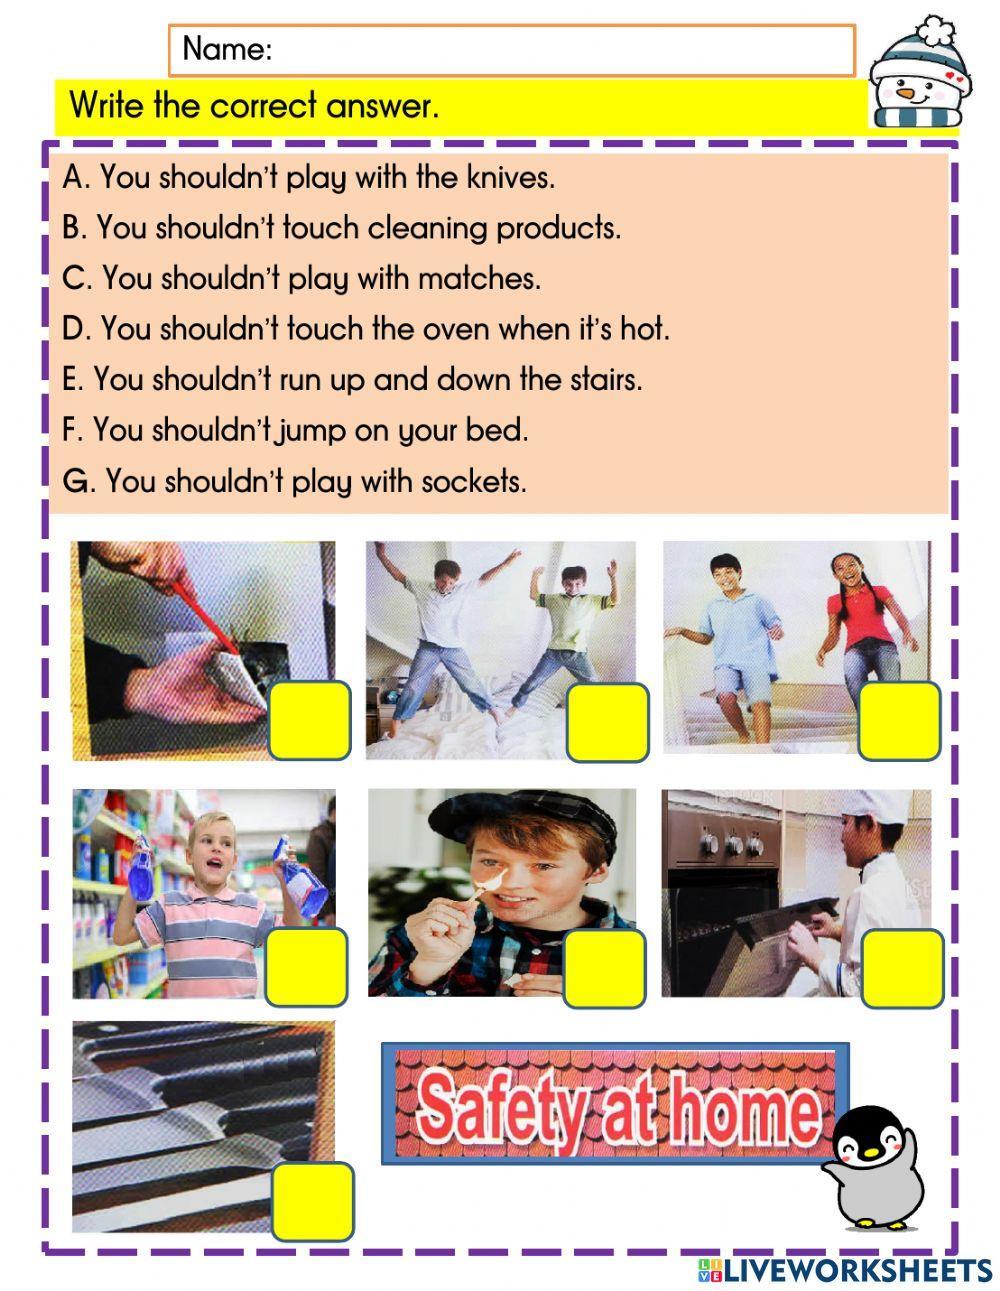 English Year 4 module 10 - safety at home